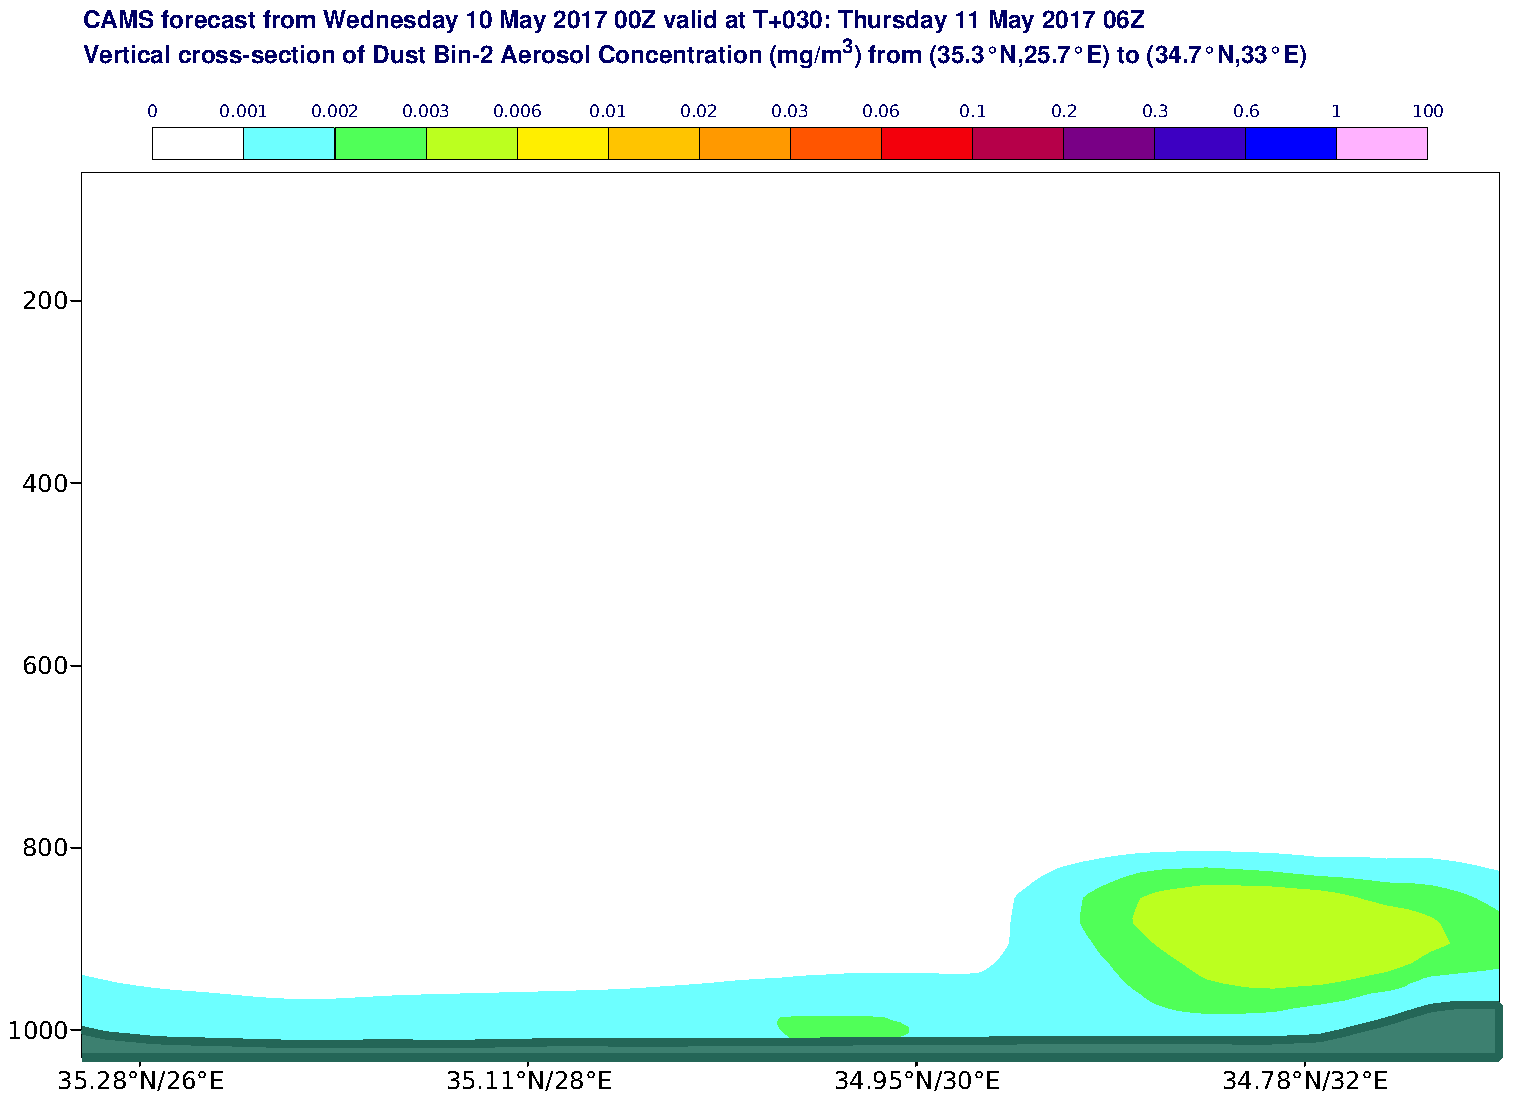 Vertical cross-section of Dust Bin-2 Aerosol Concentration (mg/m3) valid at T30 - 2017-05-11 06:00